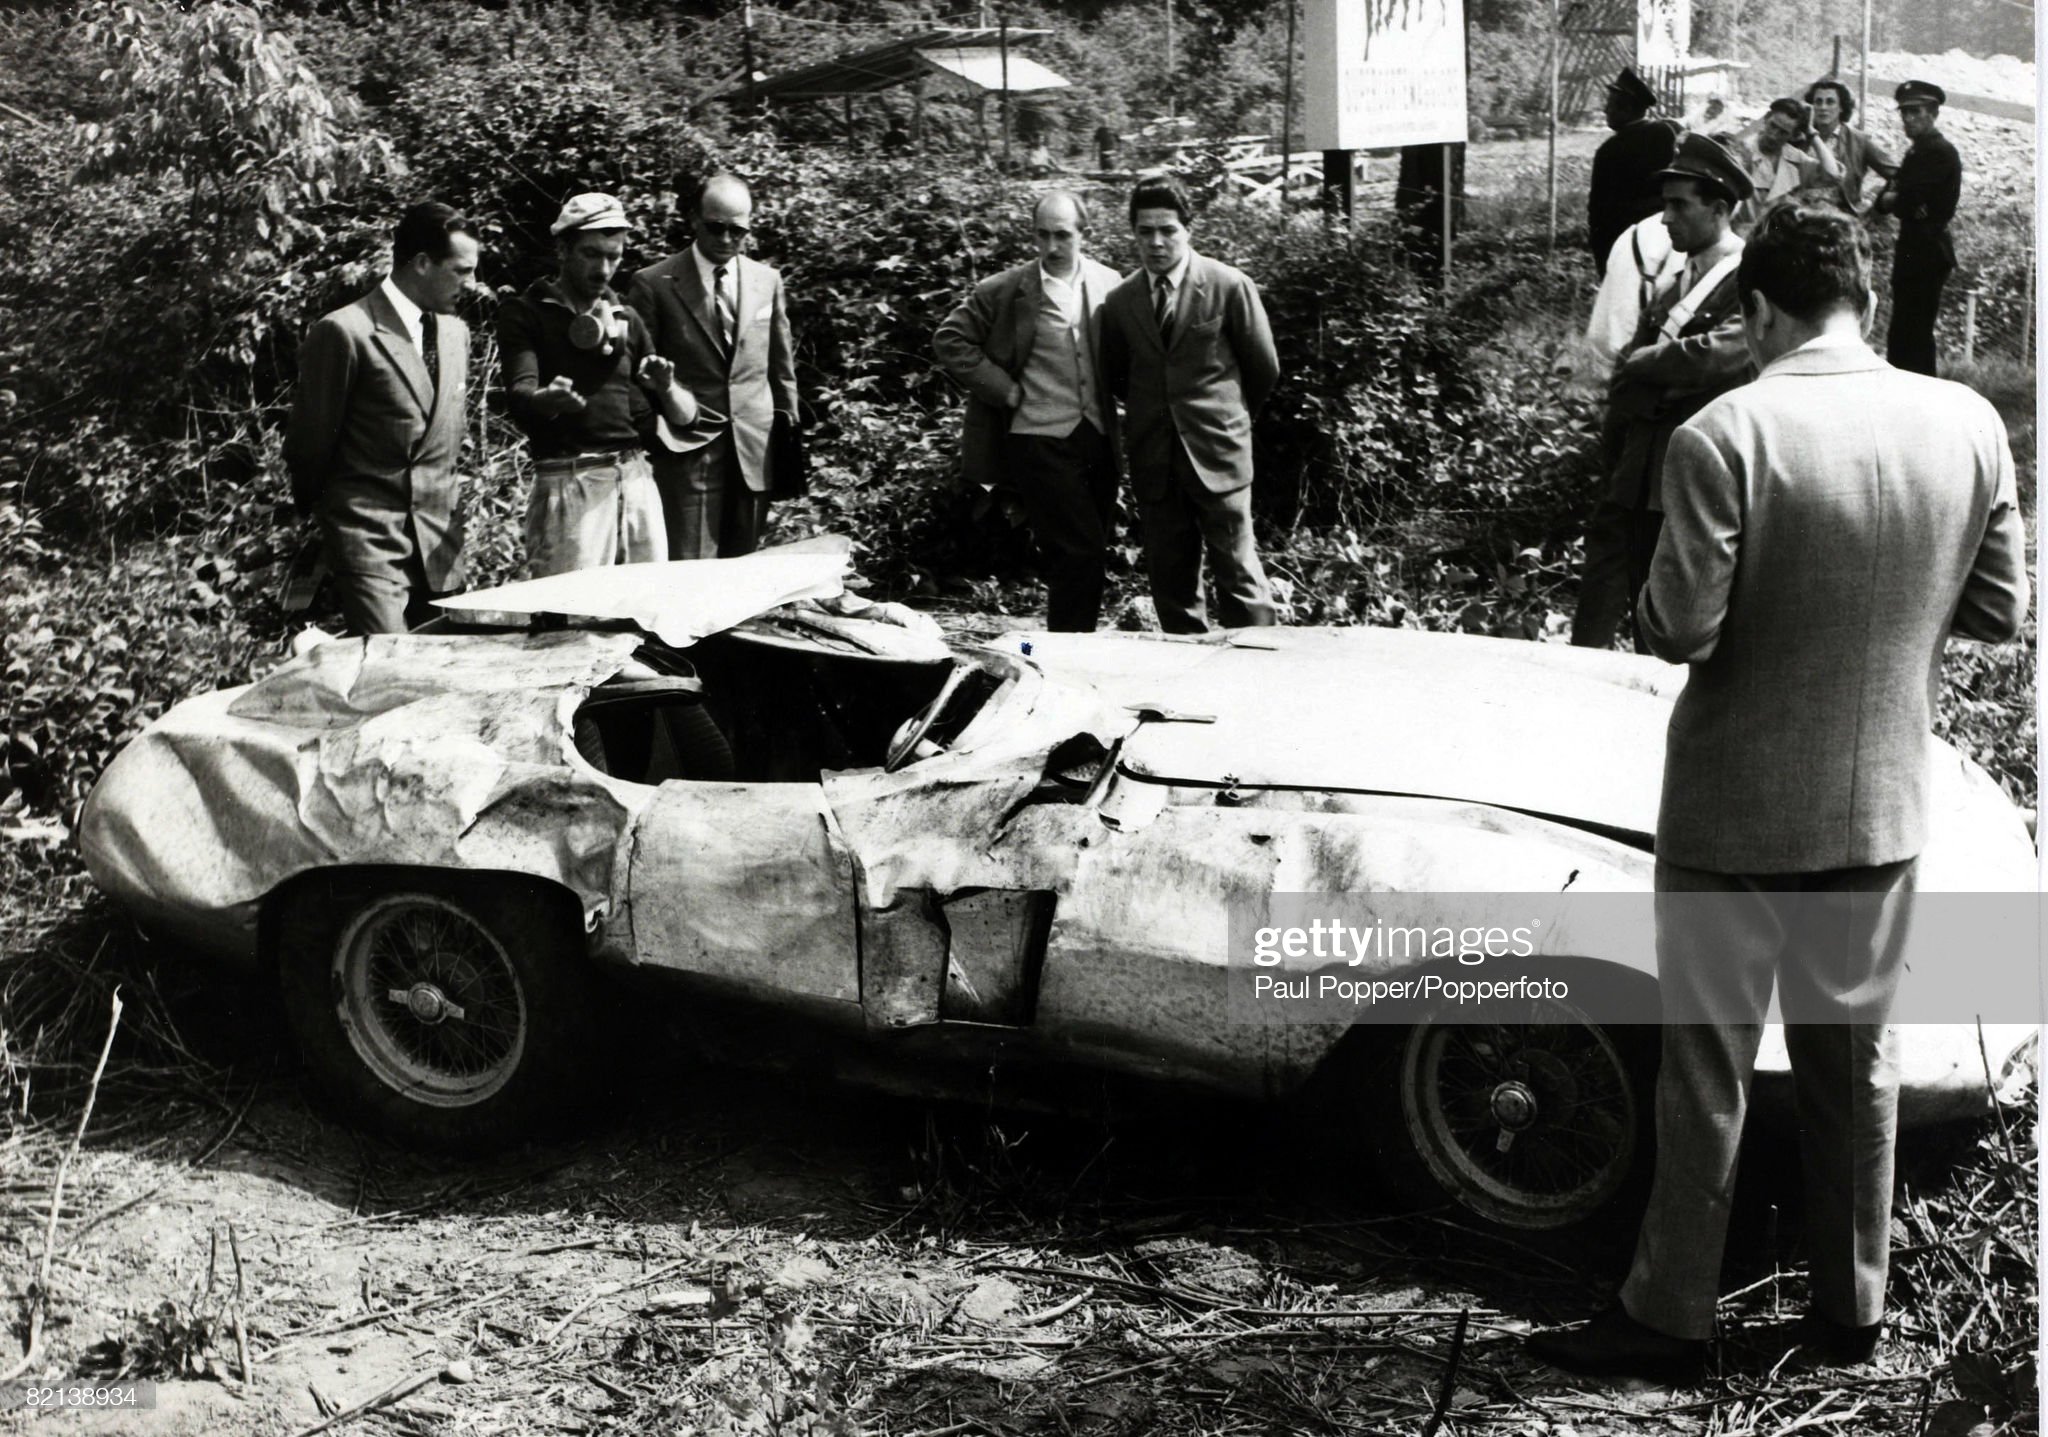 26th May 1955, Italian motor racing ace Alberto Ascari died when this Ferrari car he was testing skidded and somersaulted throwing him from the car.